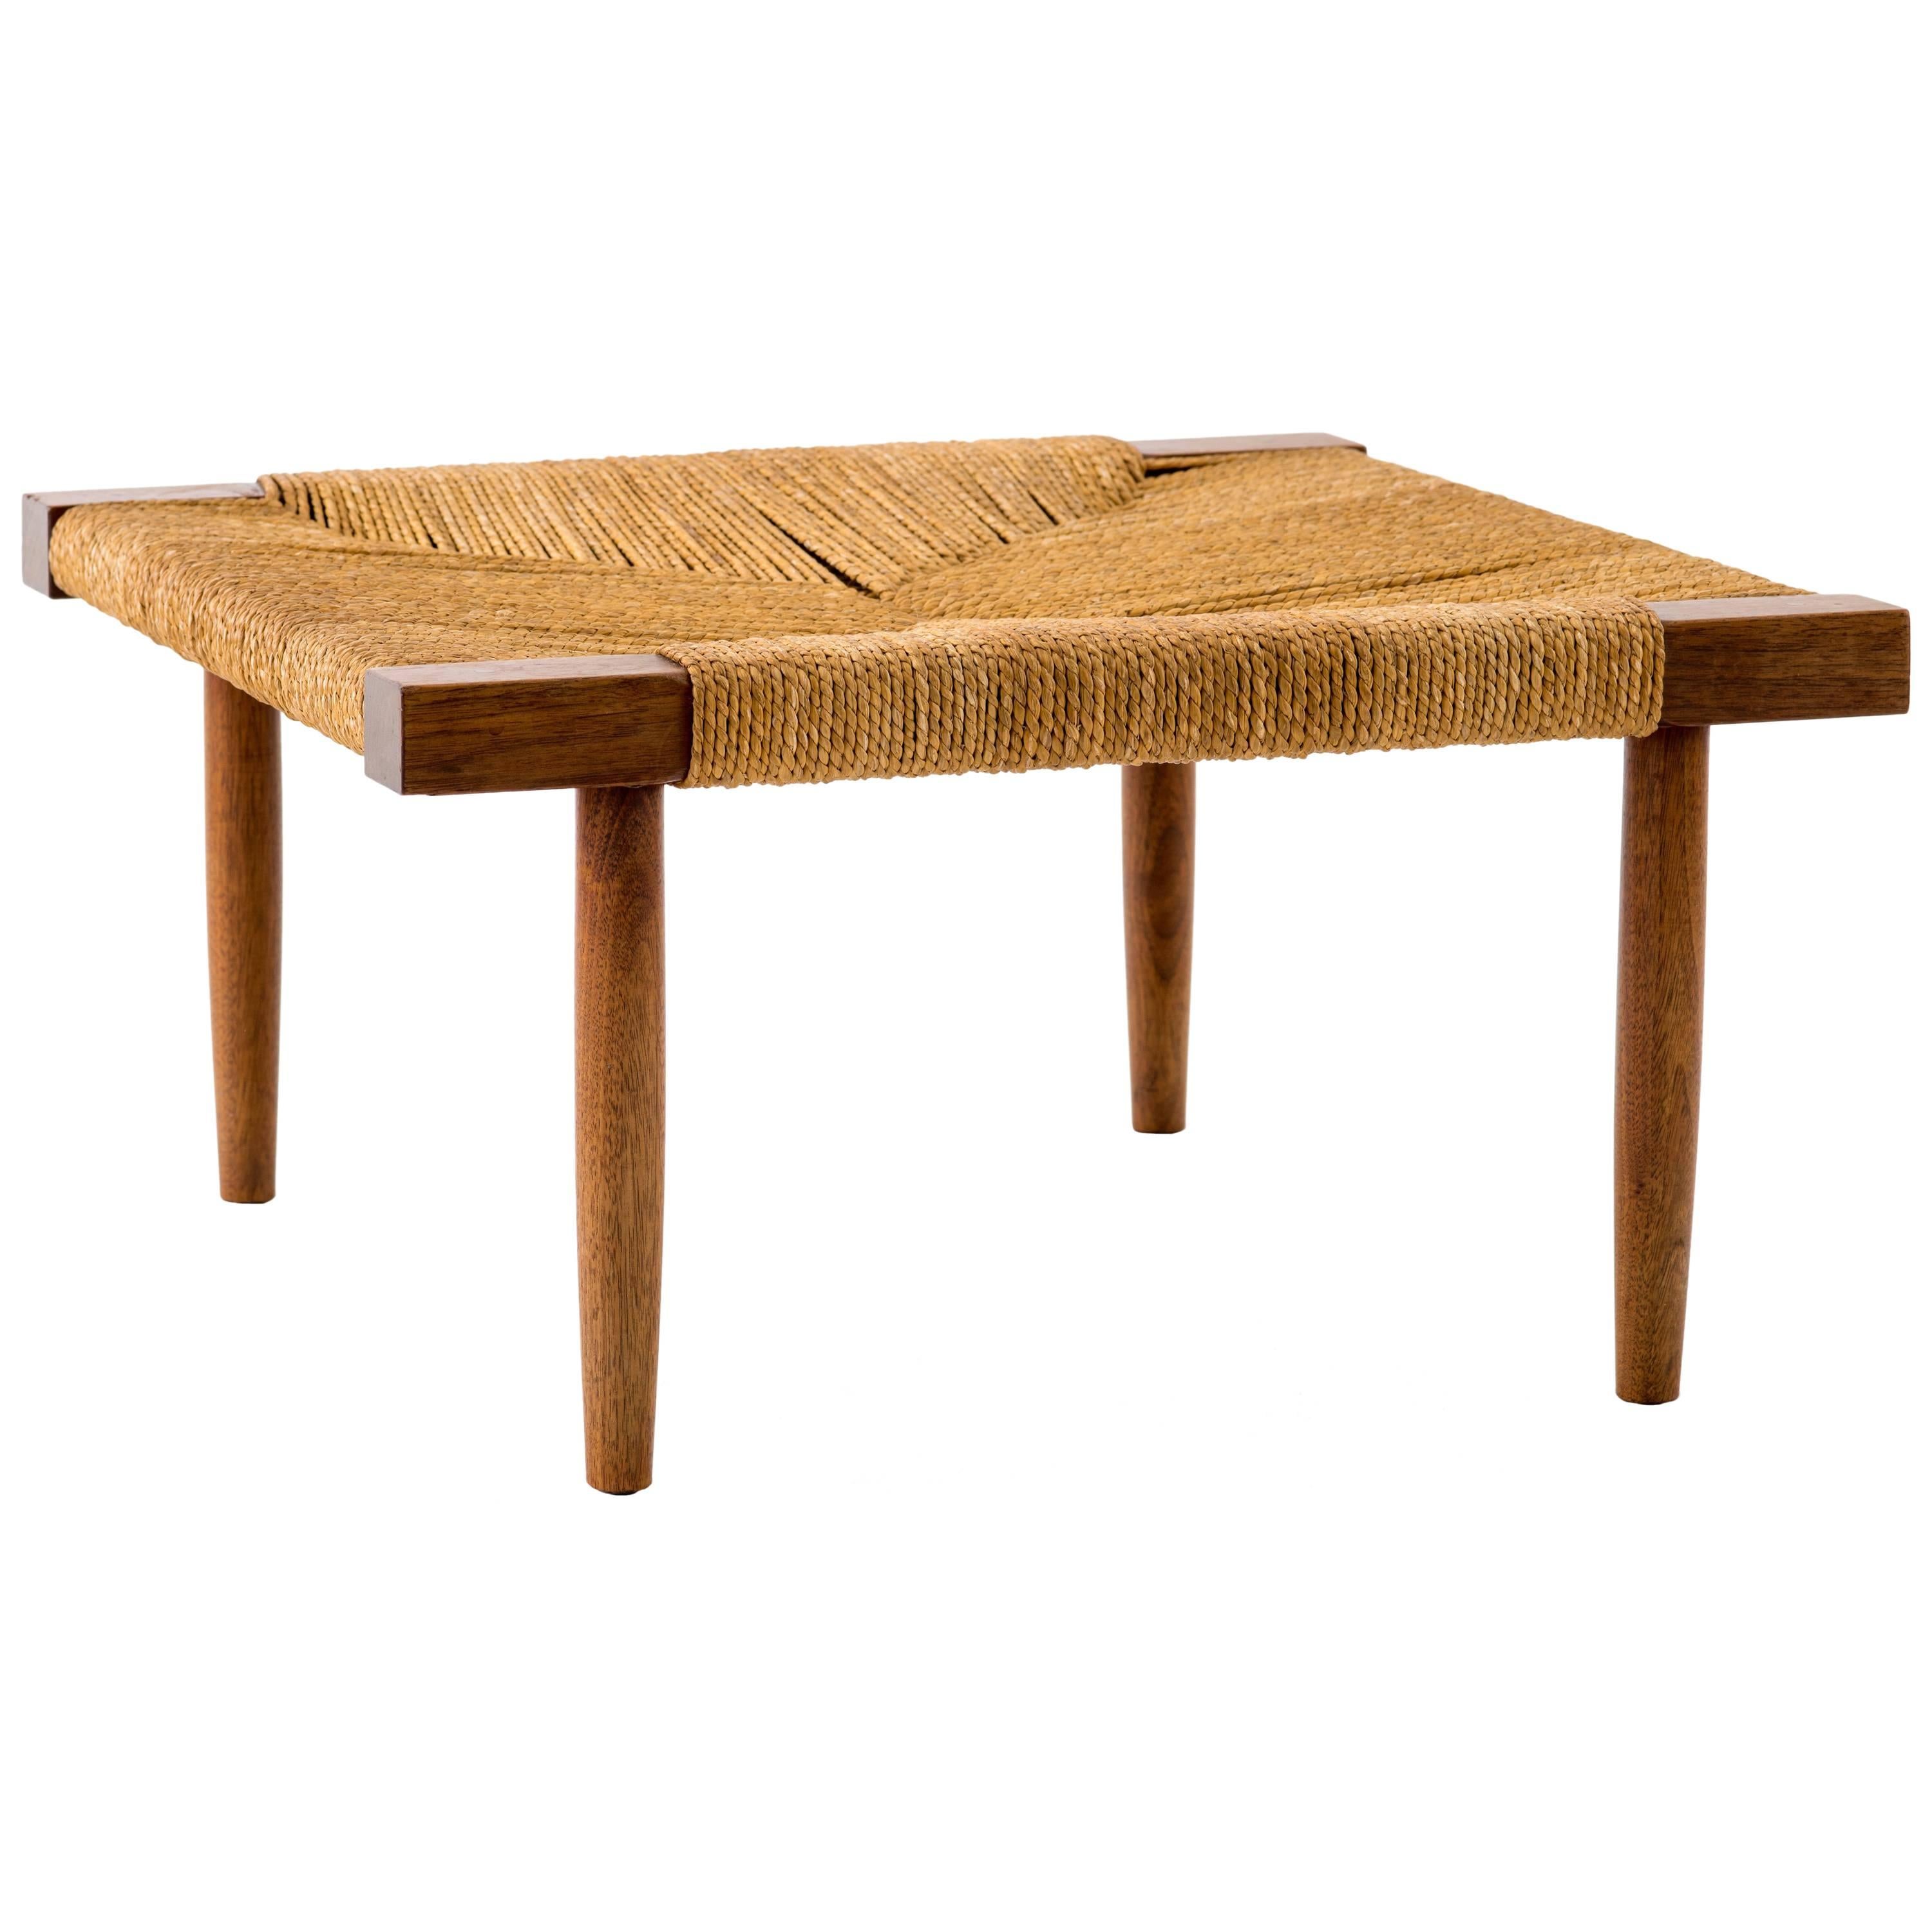 George Nakashima Fitch Stool / Ottoman in Walnut with Grass Cord Seat